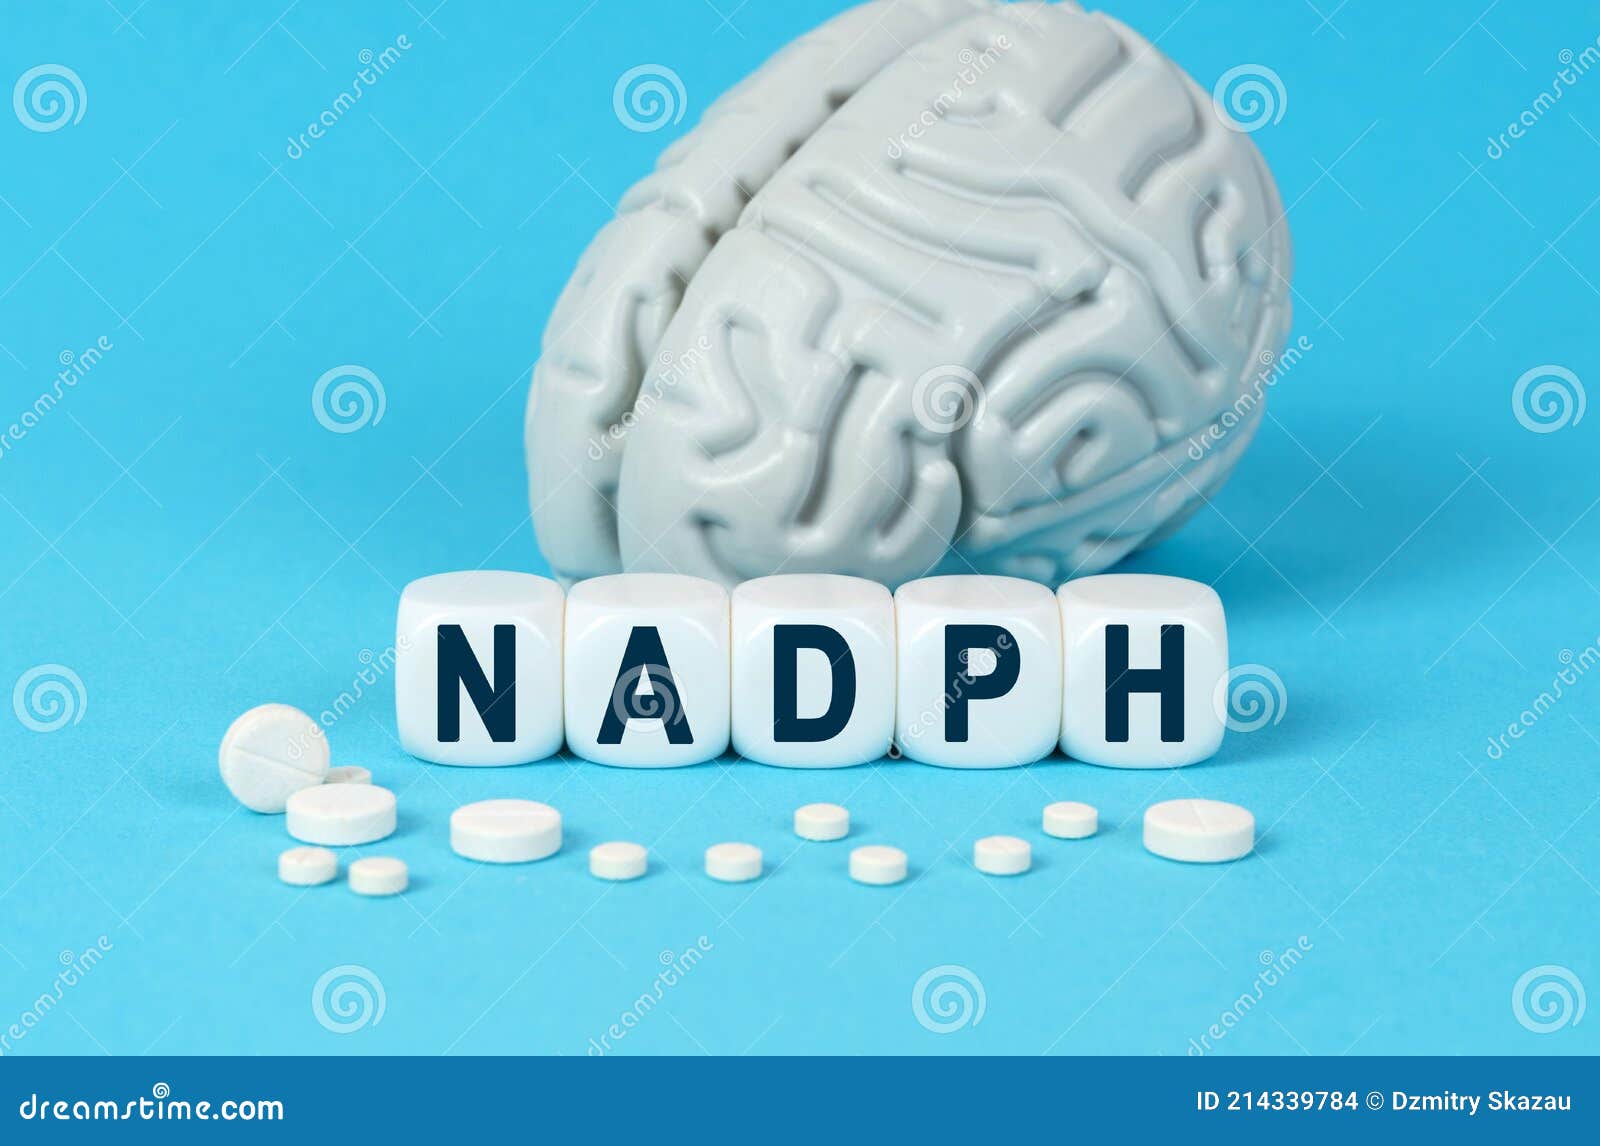 cubes lie on the table among the pills and imitation of the brain. the text on the dice - nadph